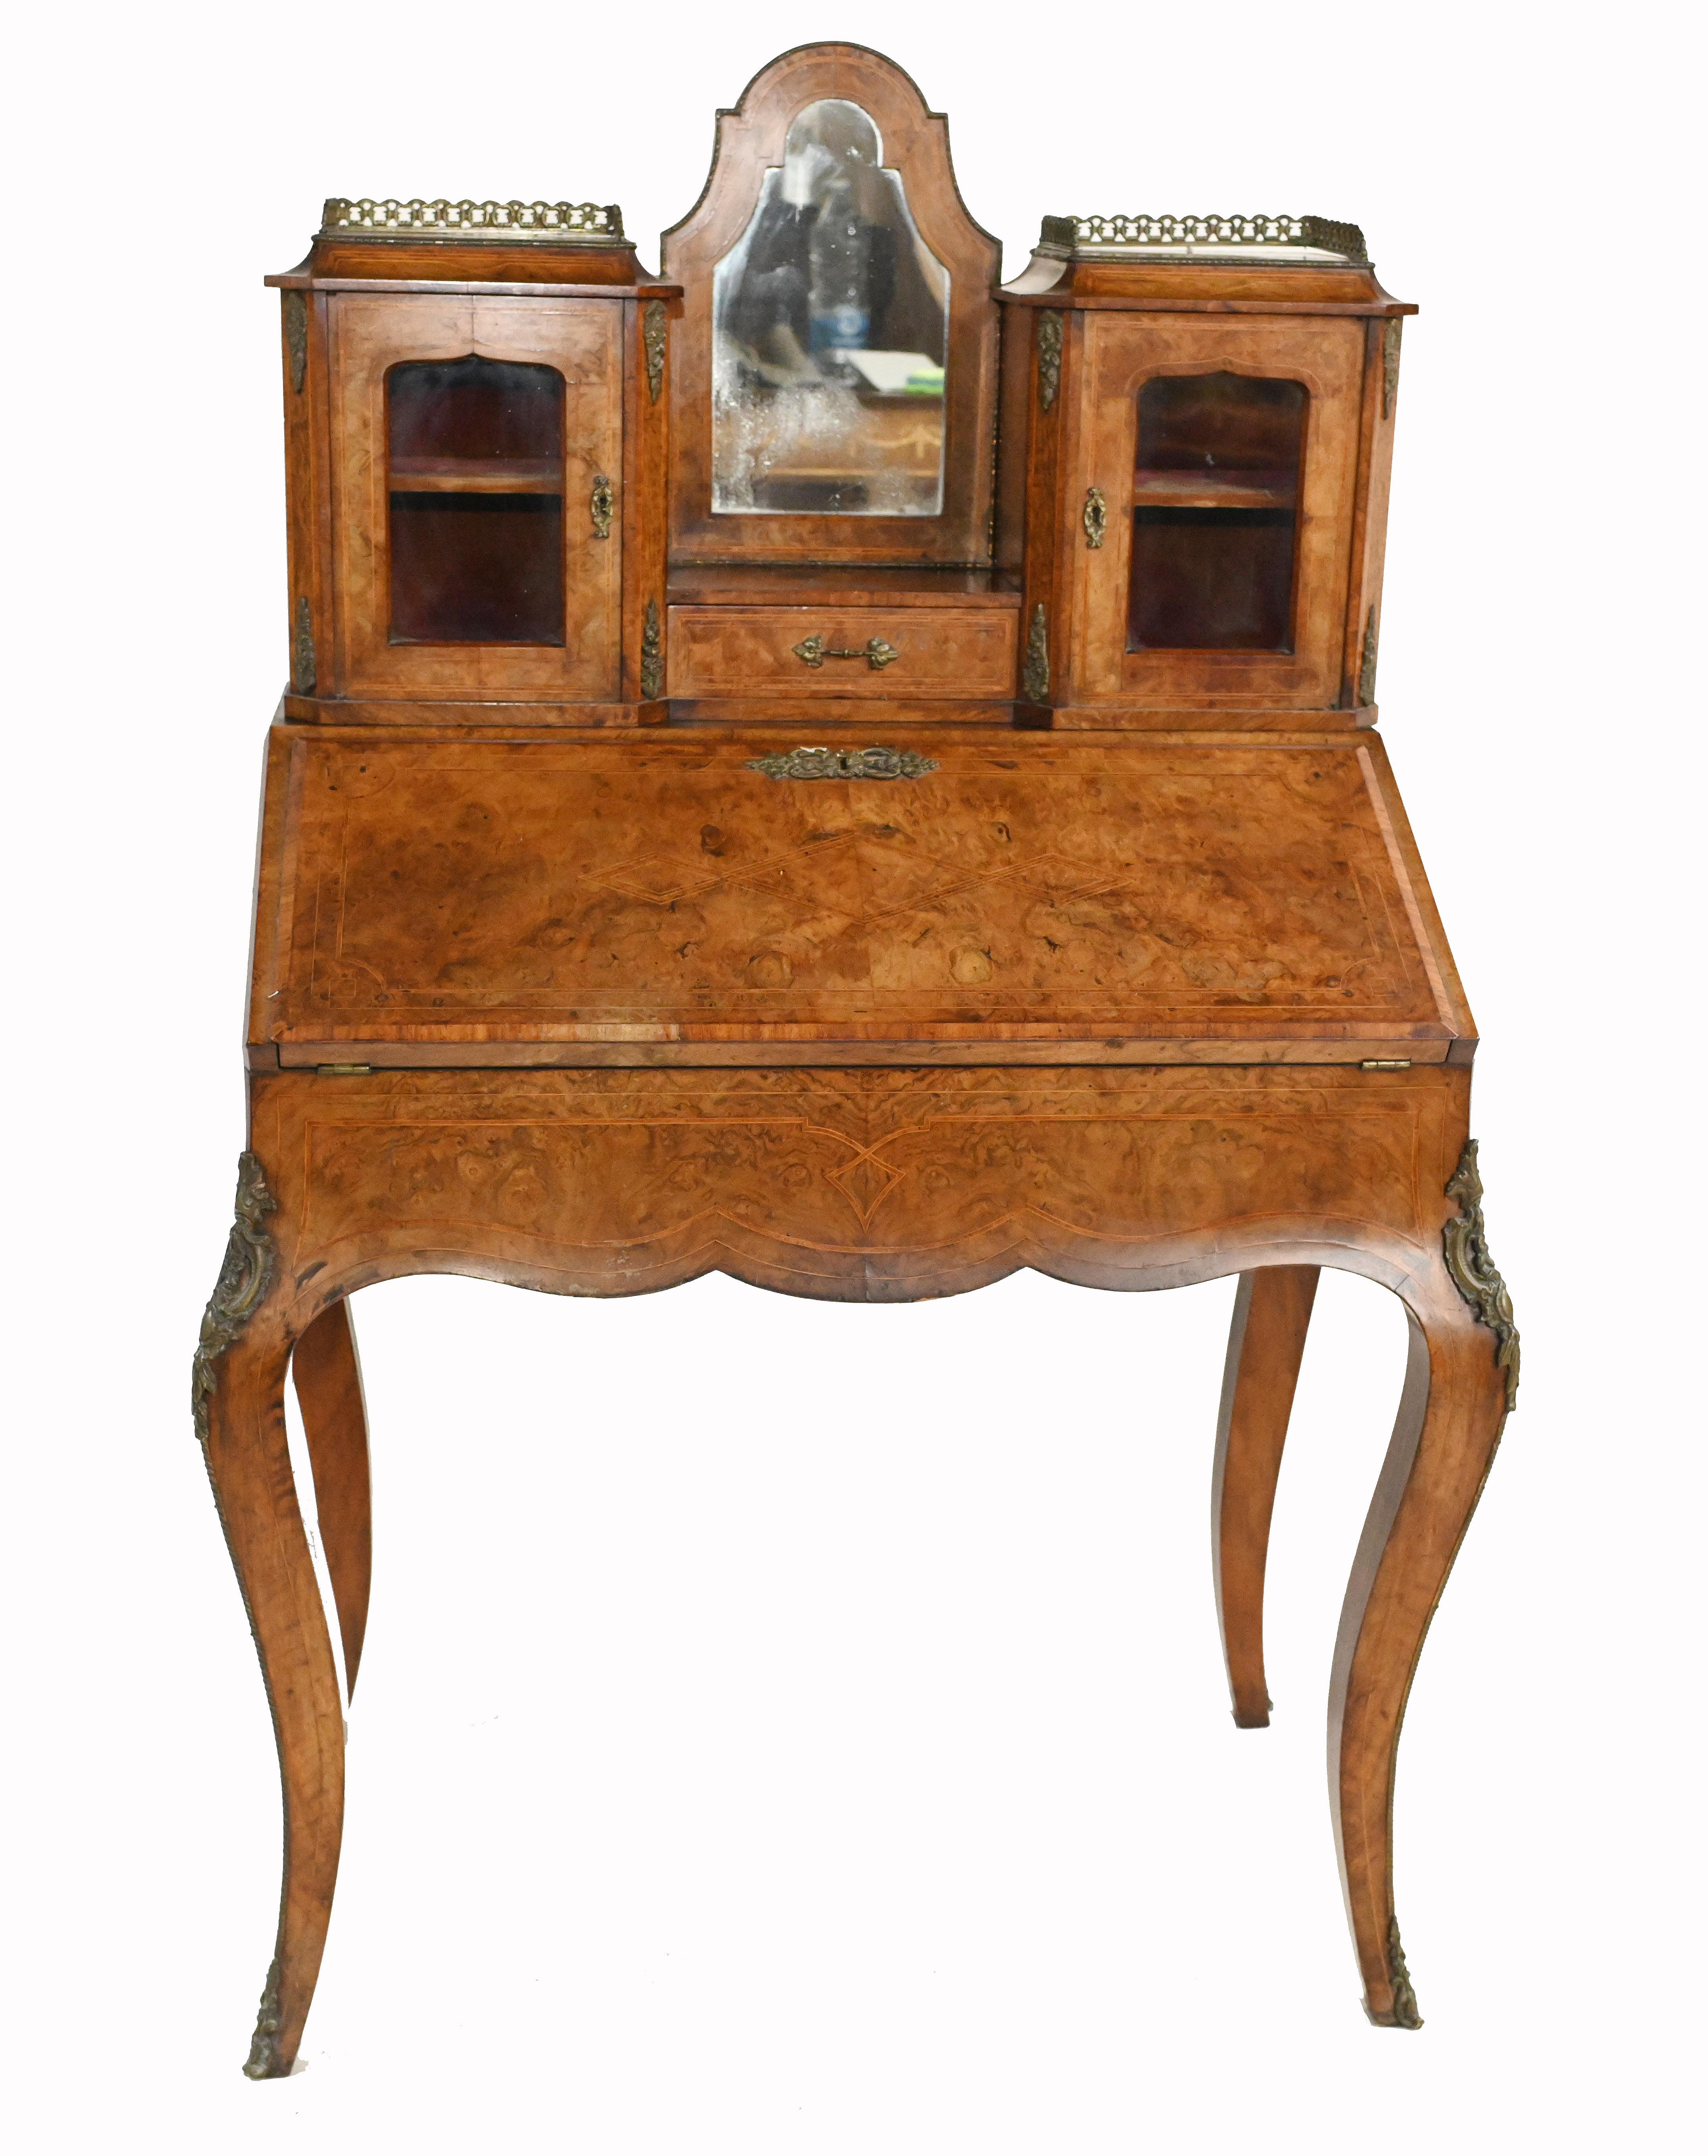 -Gorgeous French antique bonheur du jour desk
- We date this to circa 1880
- Hand crafted from walnut this really is a museum quality collectors piece
- Offered in great condition, ready for home use right away
- Please let us know if you would